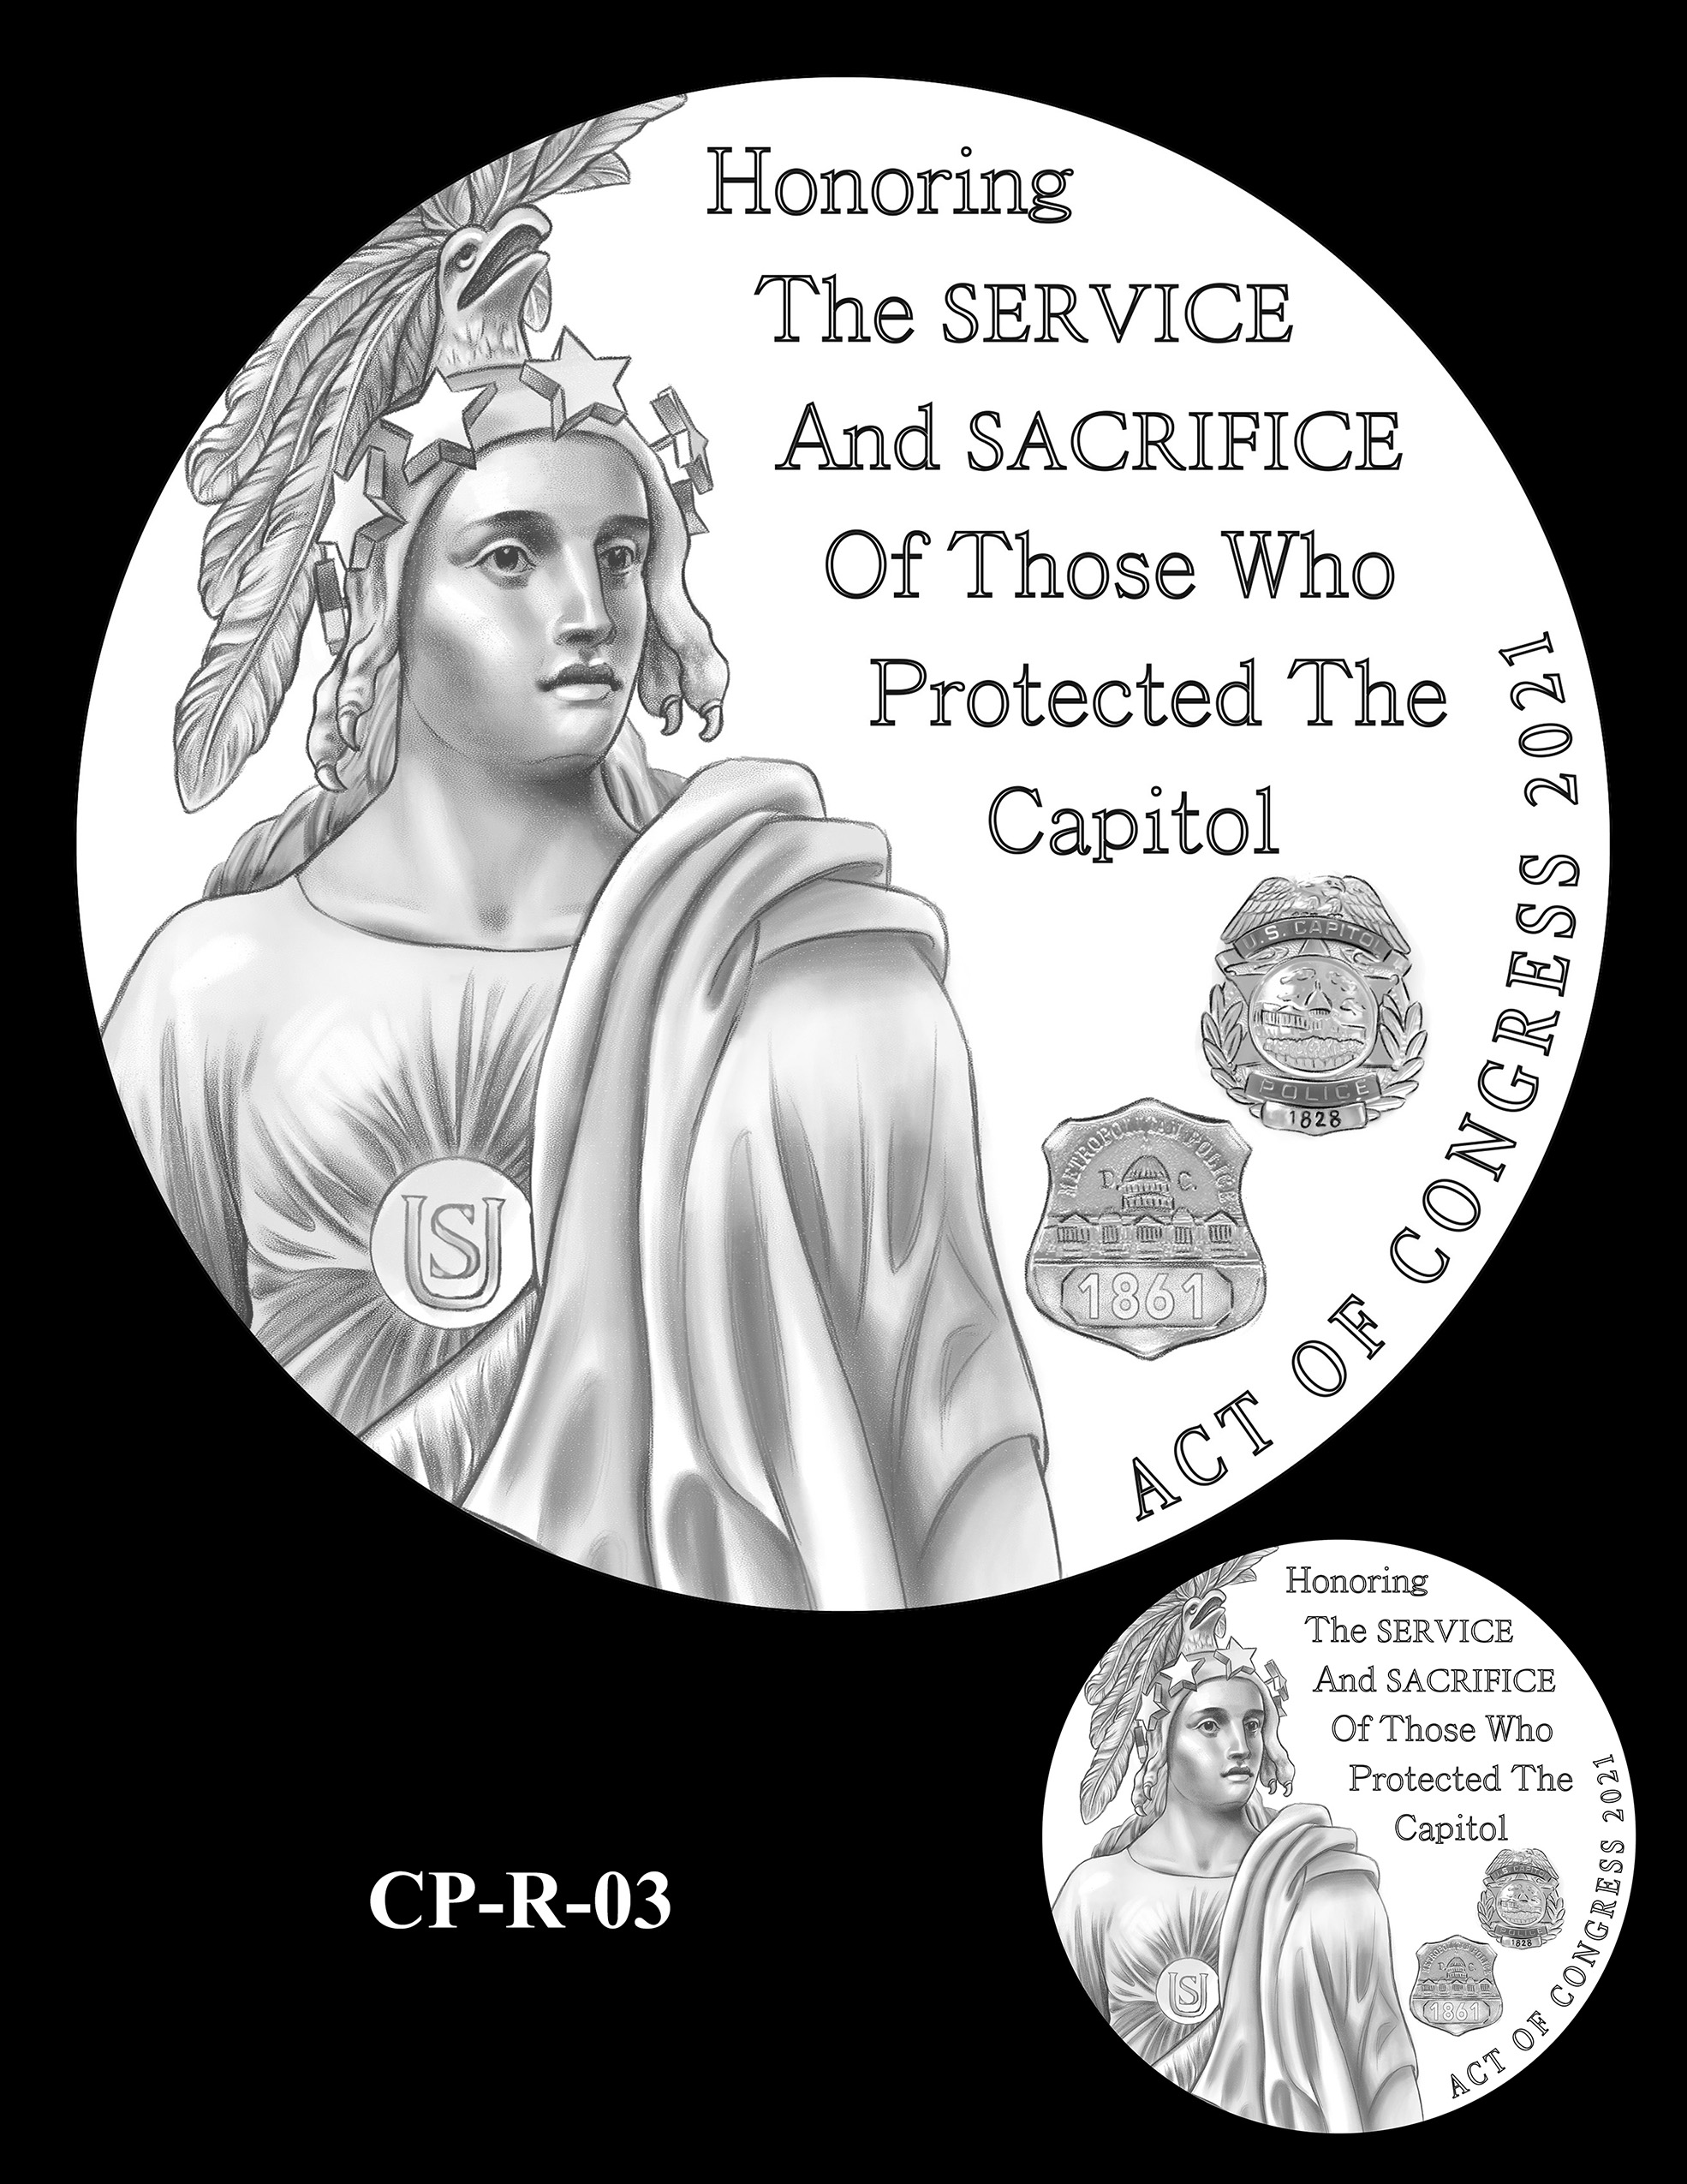 CP-R-03 -- Congressional Gold Medal for Those Who Protected the U.S. Capitol on January 6th 2021